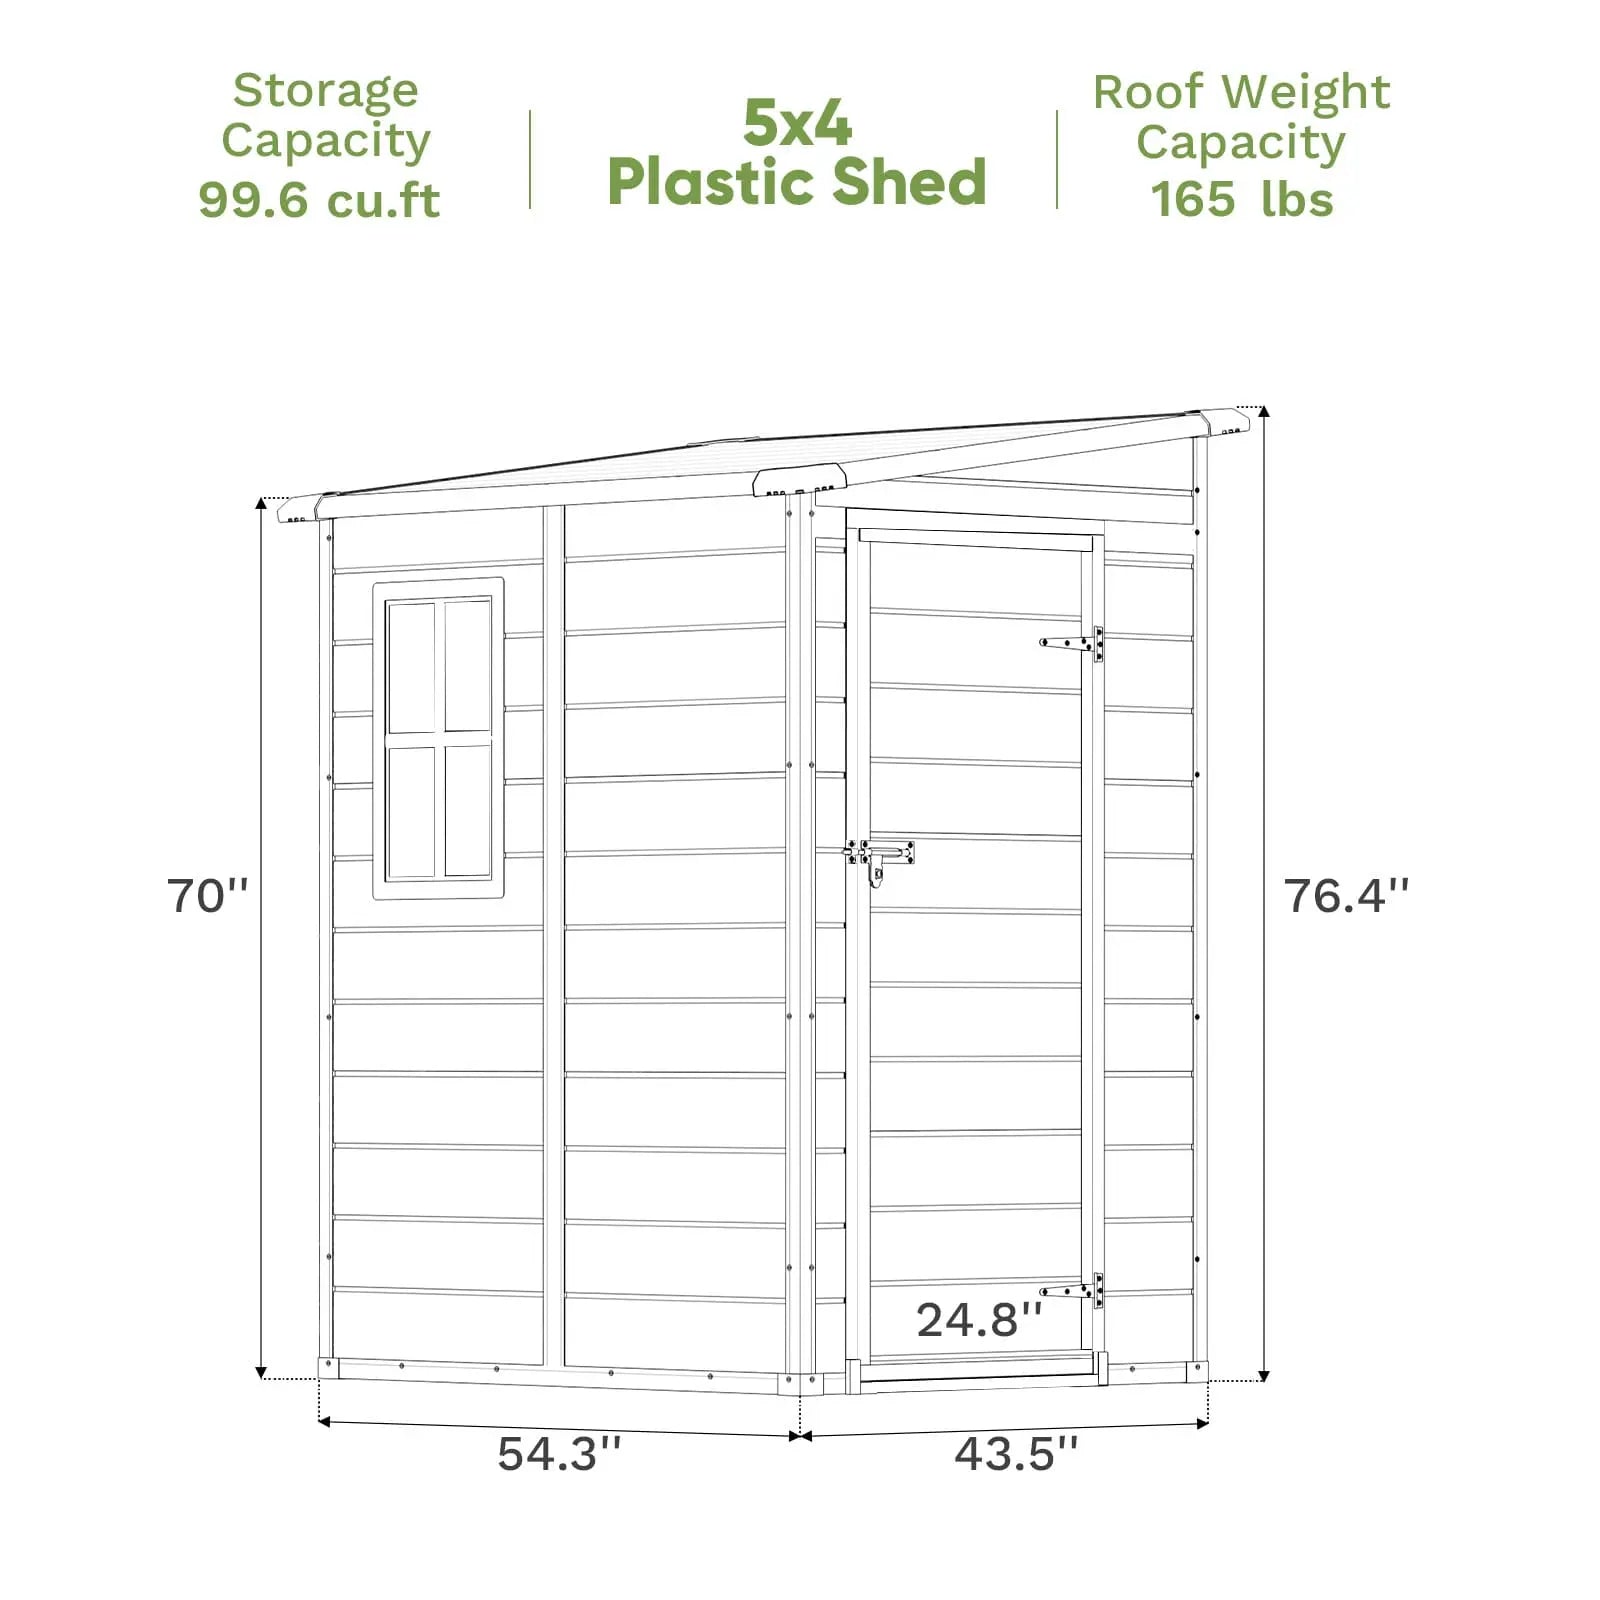 Patiowell 5x4 Plastic Shed-Dimensions